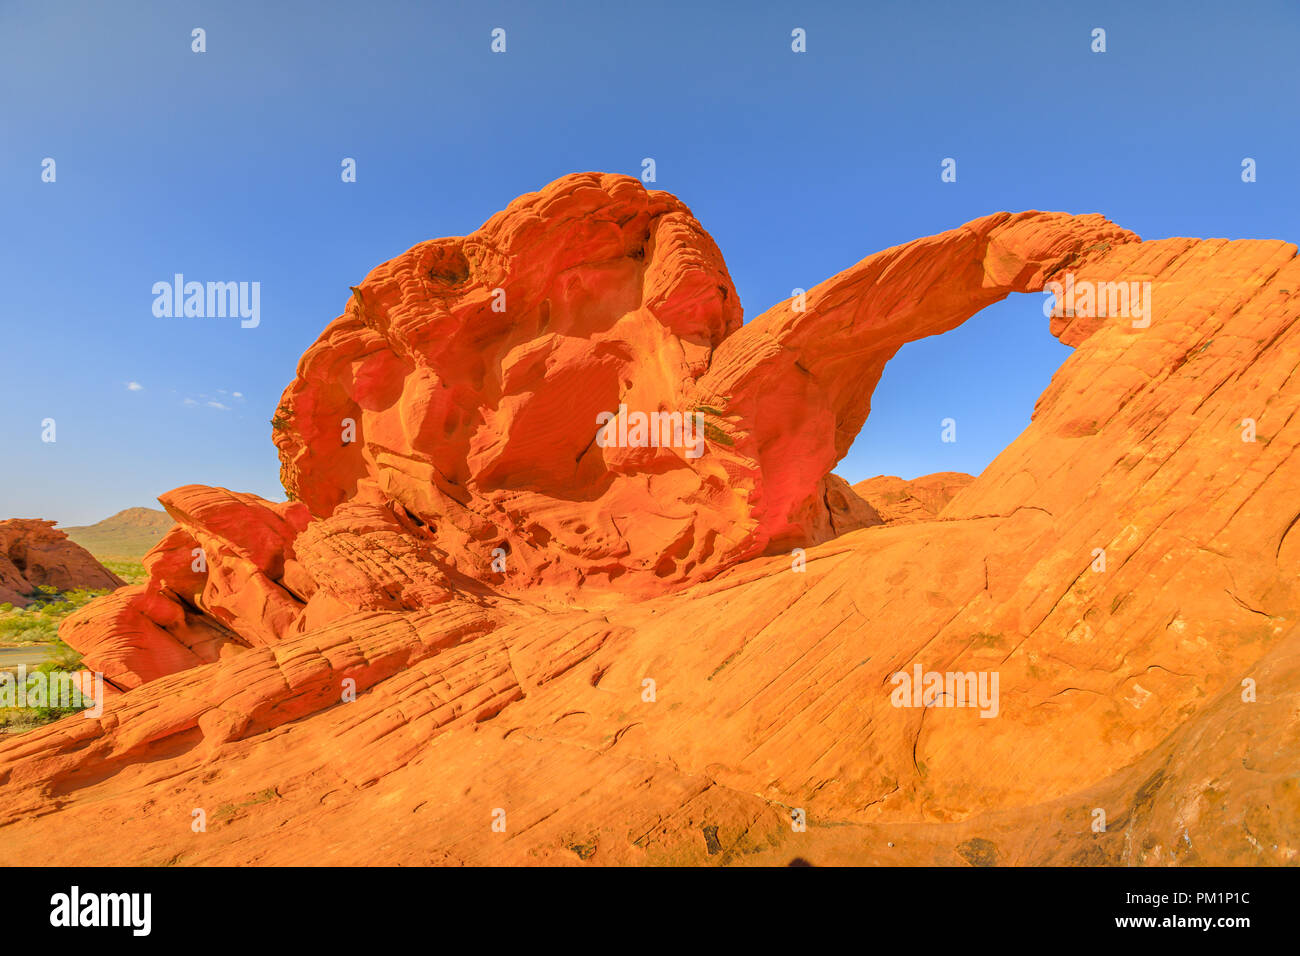 The iconic Arch Rock a natural arch along Valley of Fire scenic loop, Nevada's oldest state park famous for red sandstone formations formed from great shifting sand dunes during the age of dinosaurs. Stock Photo